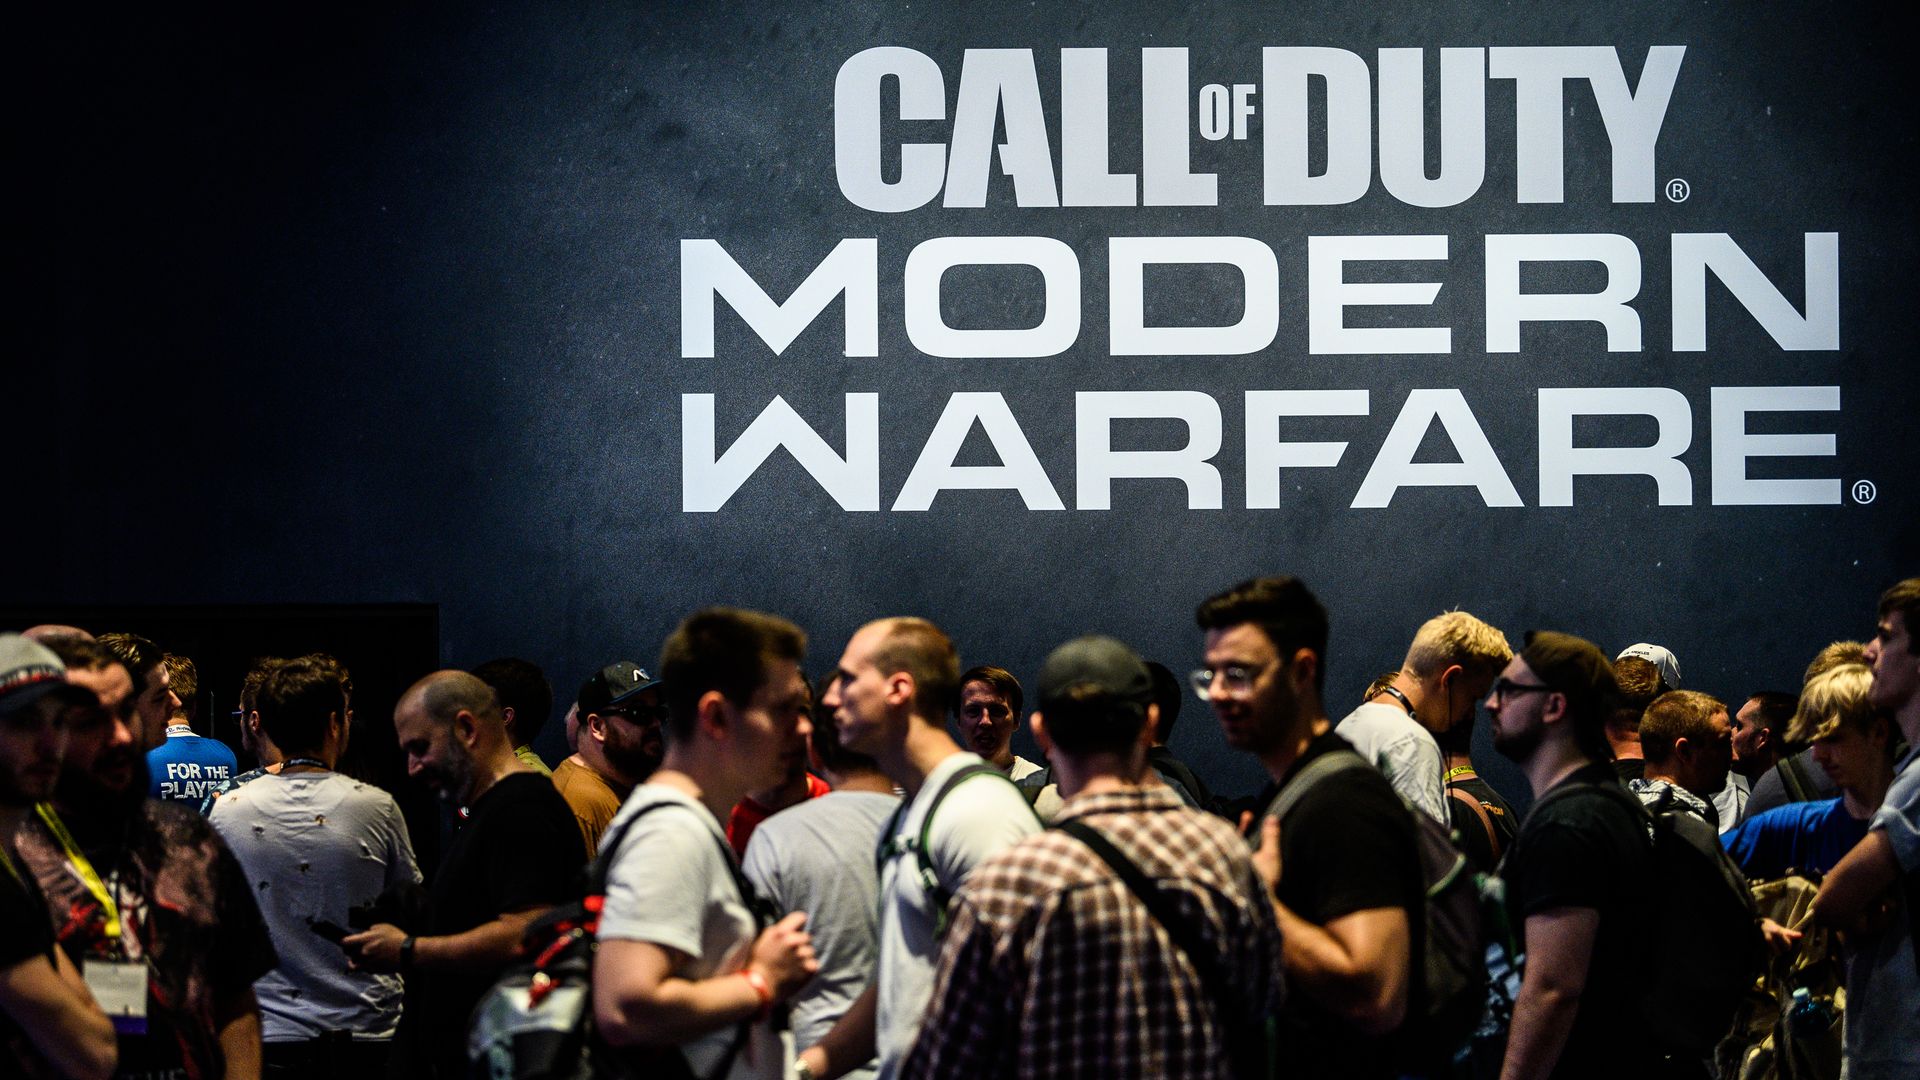 Visitors wait to try out the latest version of Call of Duty Modern Warfare